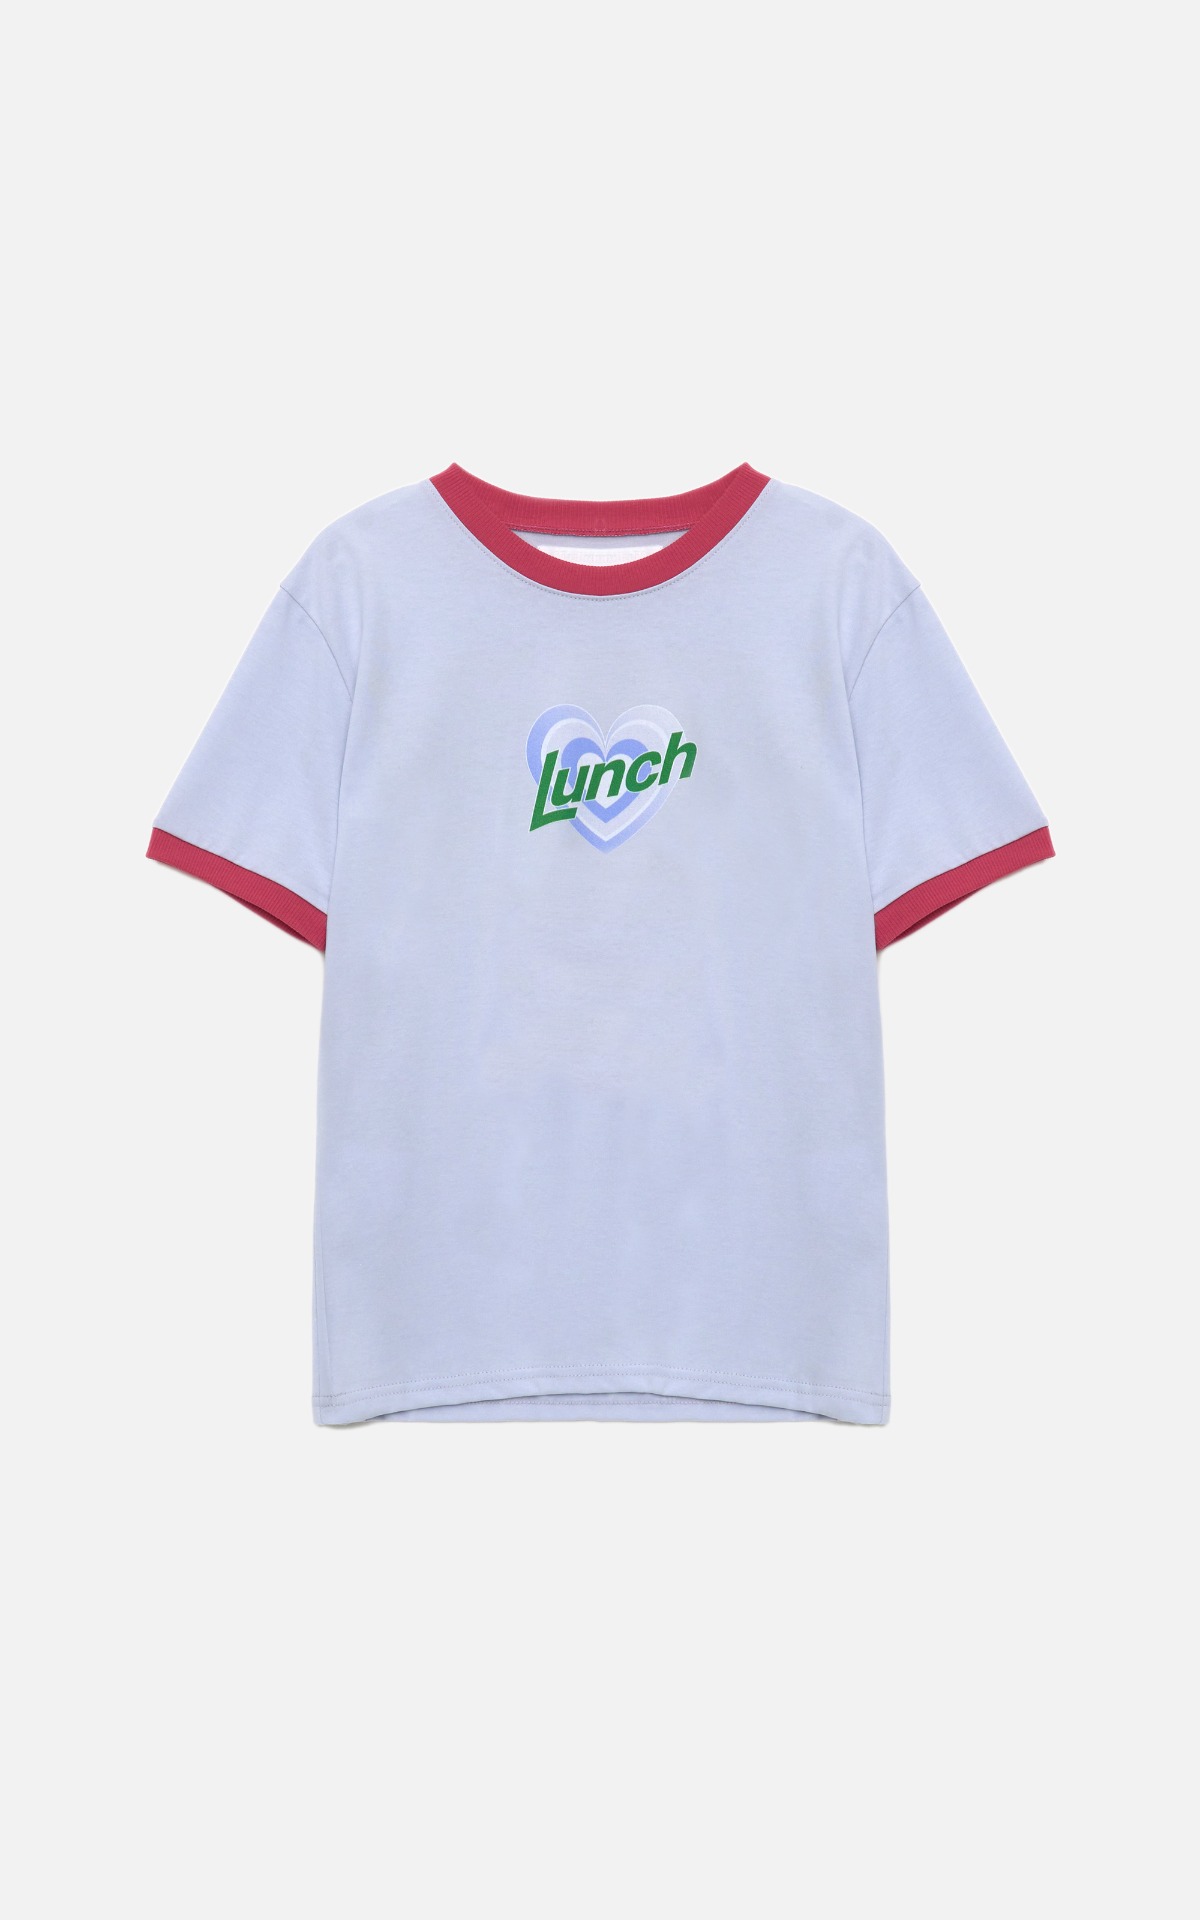 LUNCH T-SHIRT_PINK